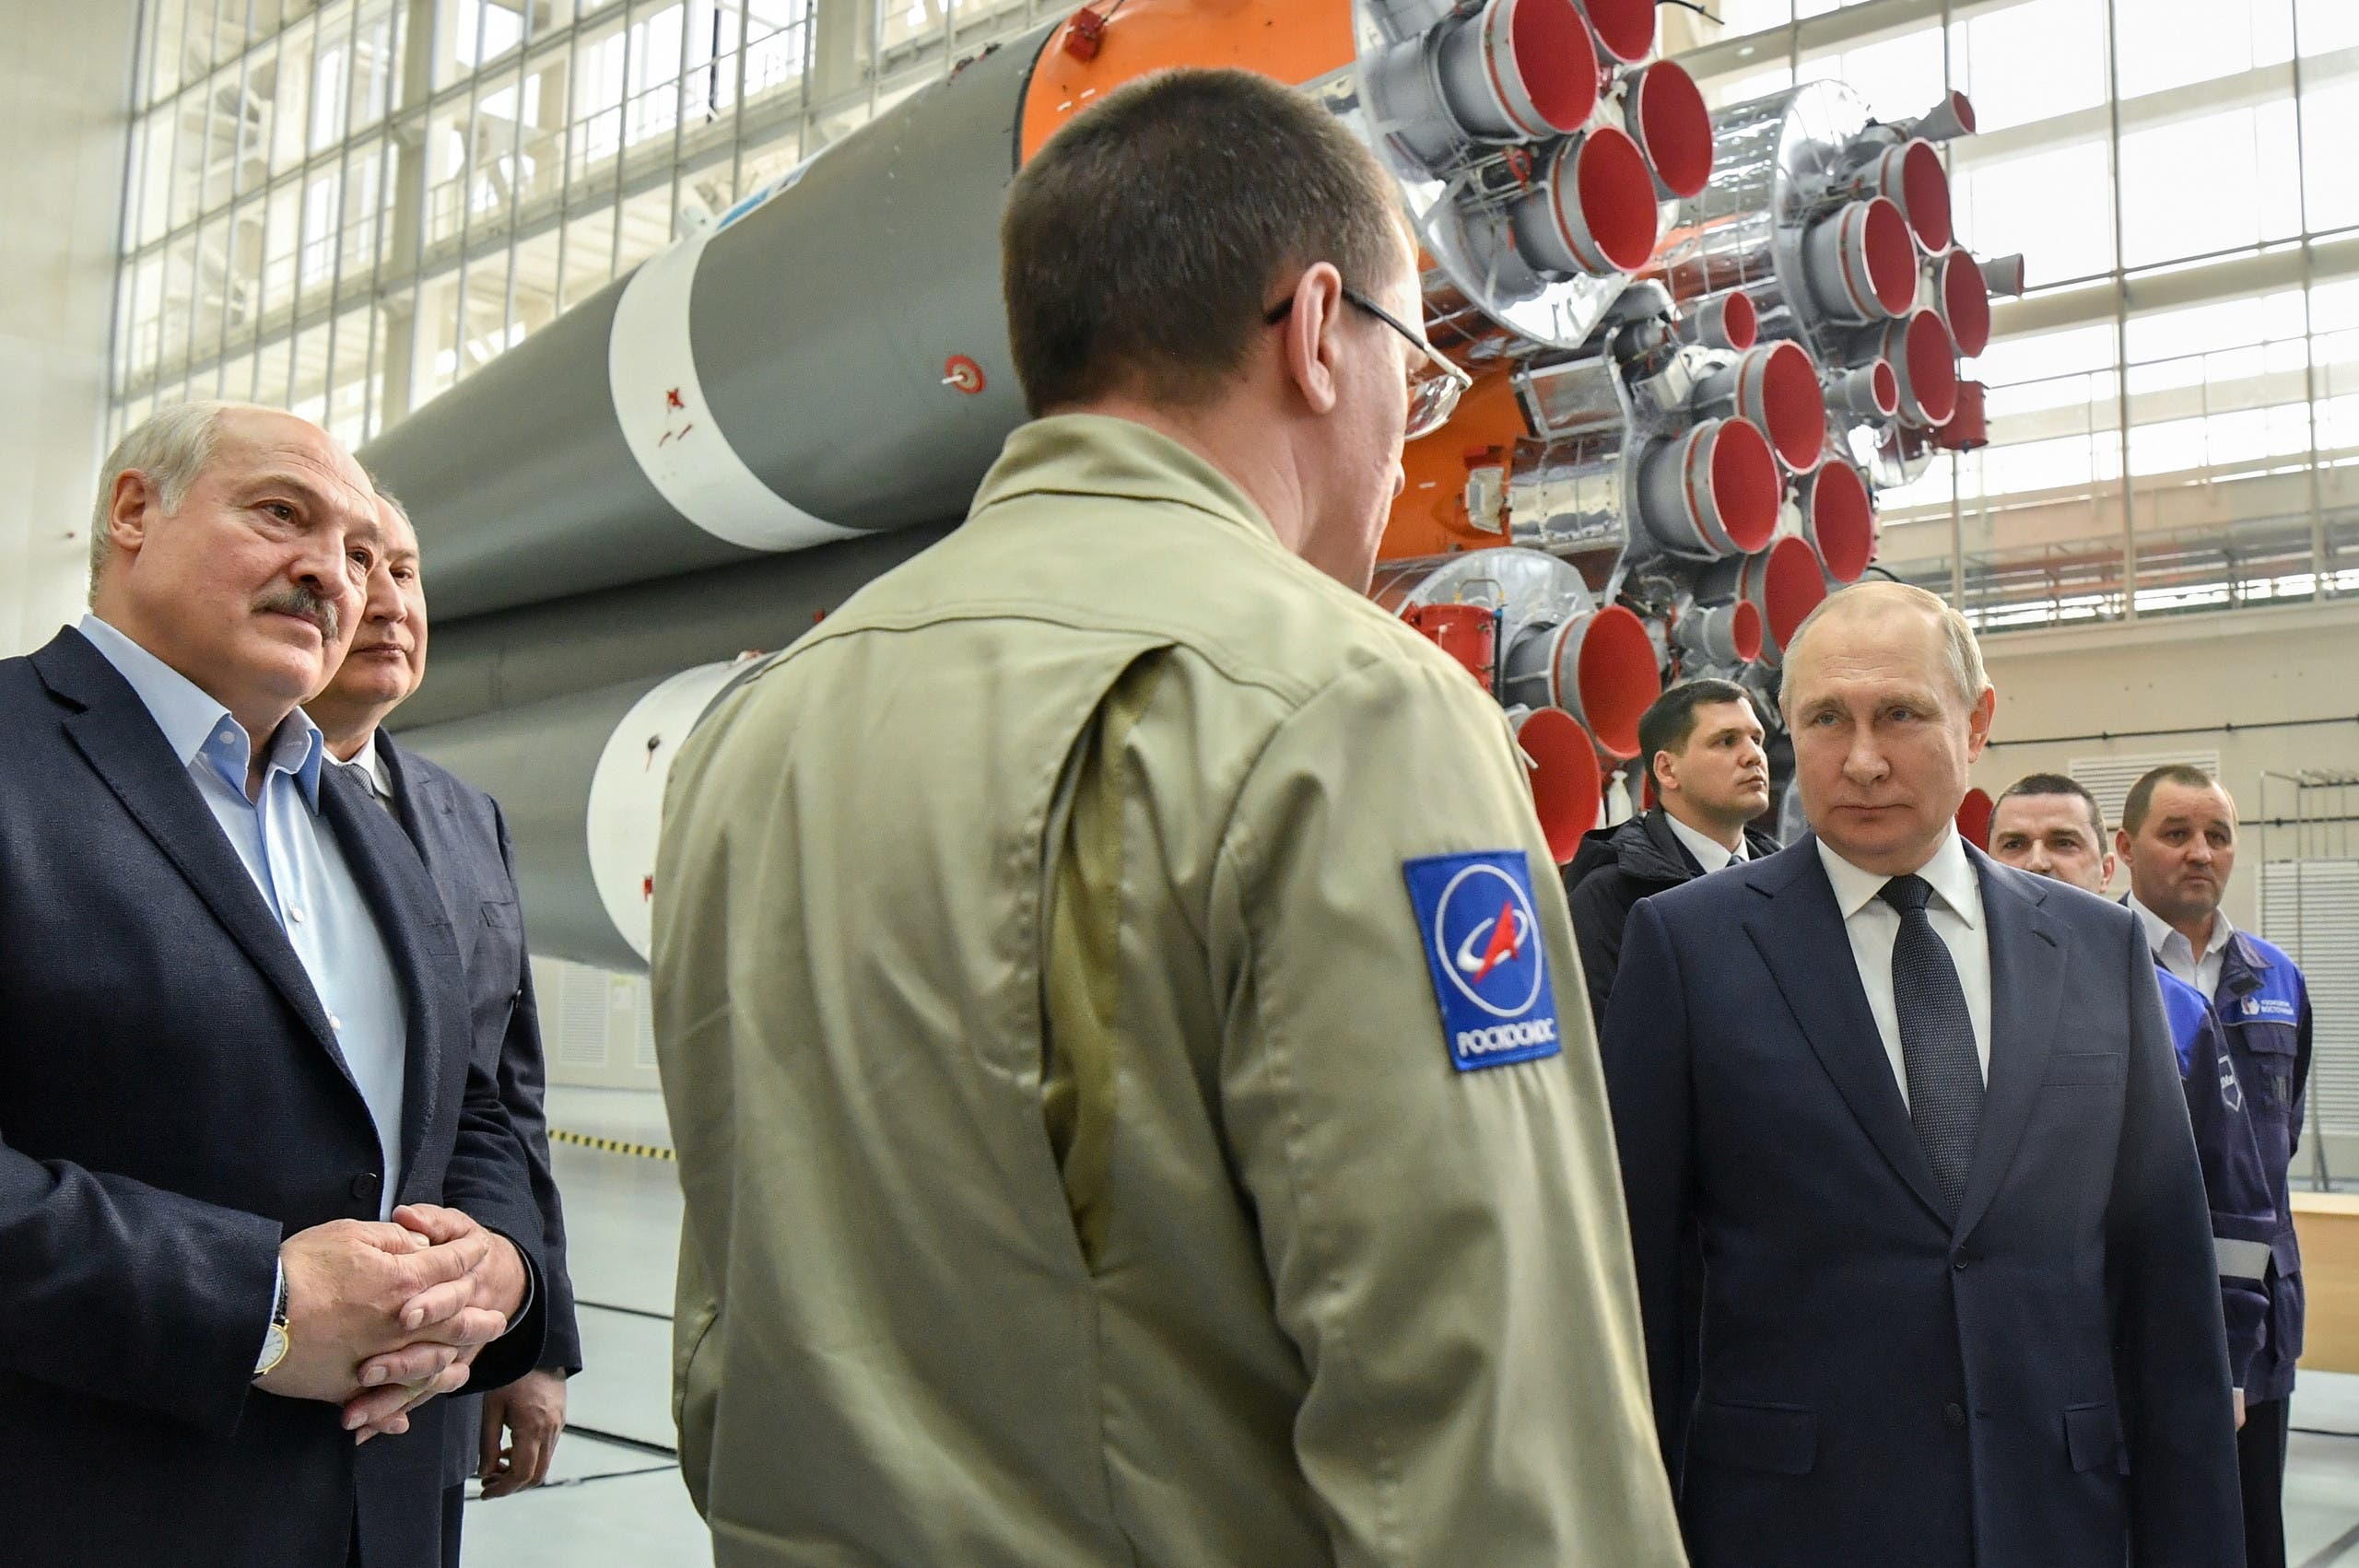 Putin and Lukashenko visited a missile facility in Russia last April